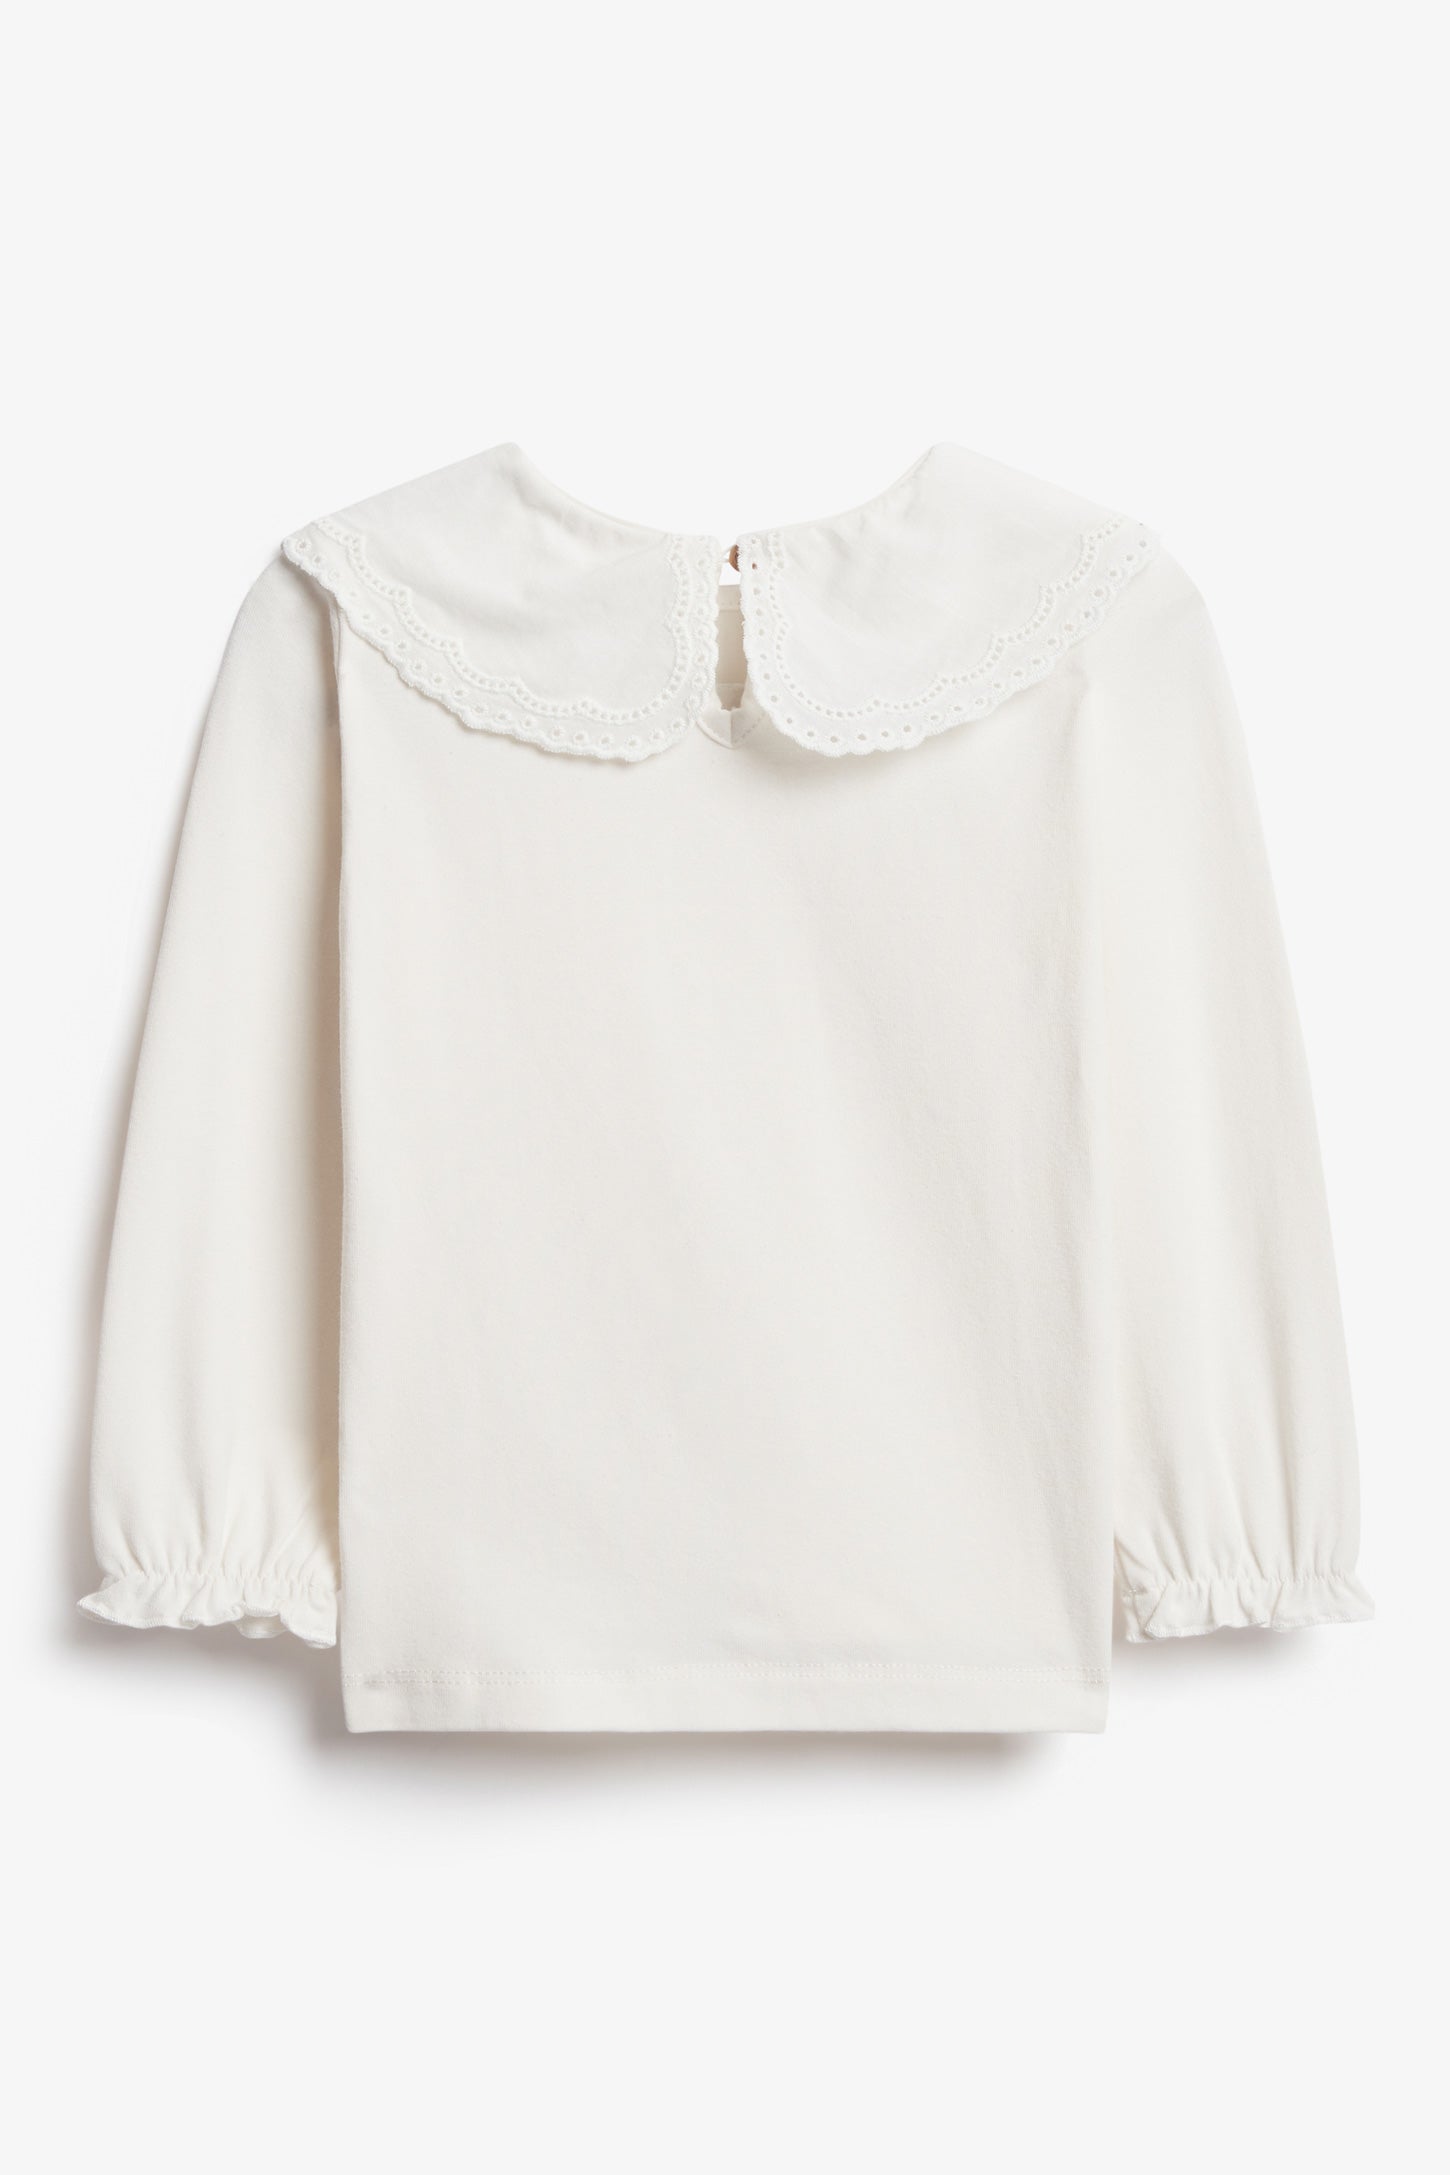 Ladies Peter Pan Collar Blouse on white with long sleeve